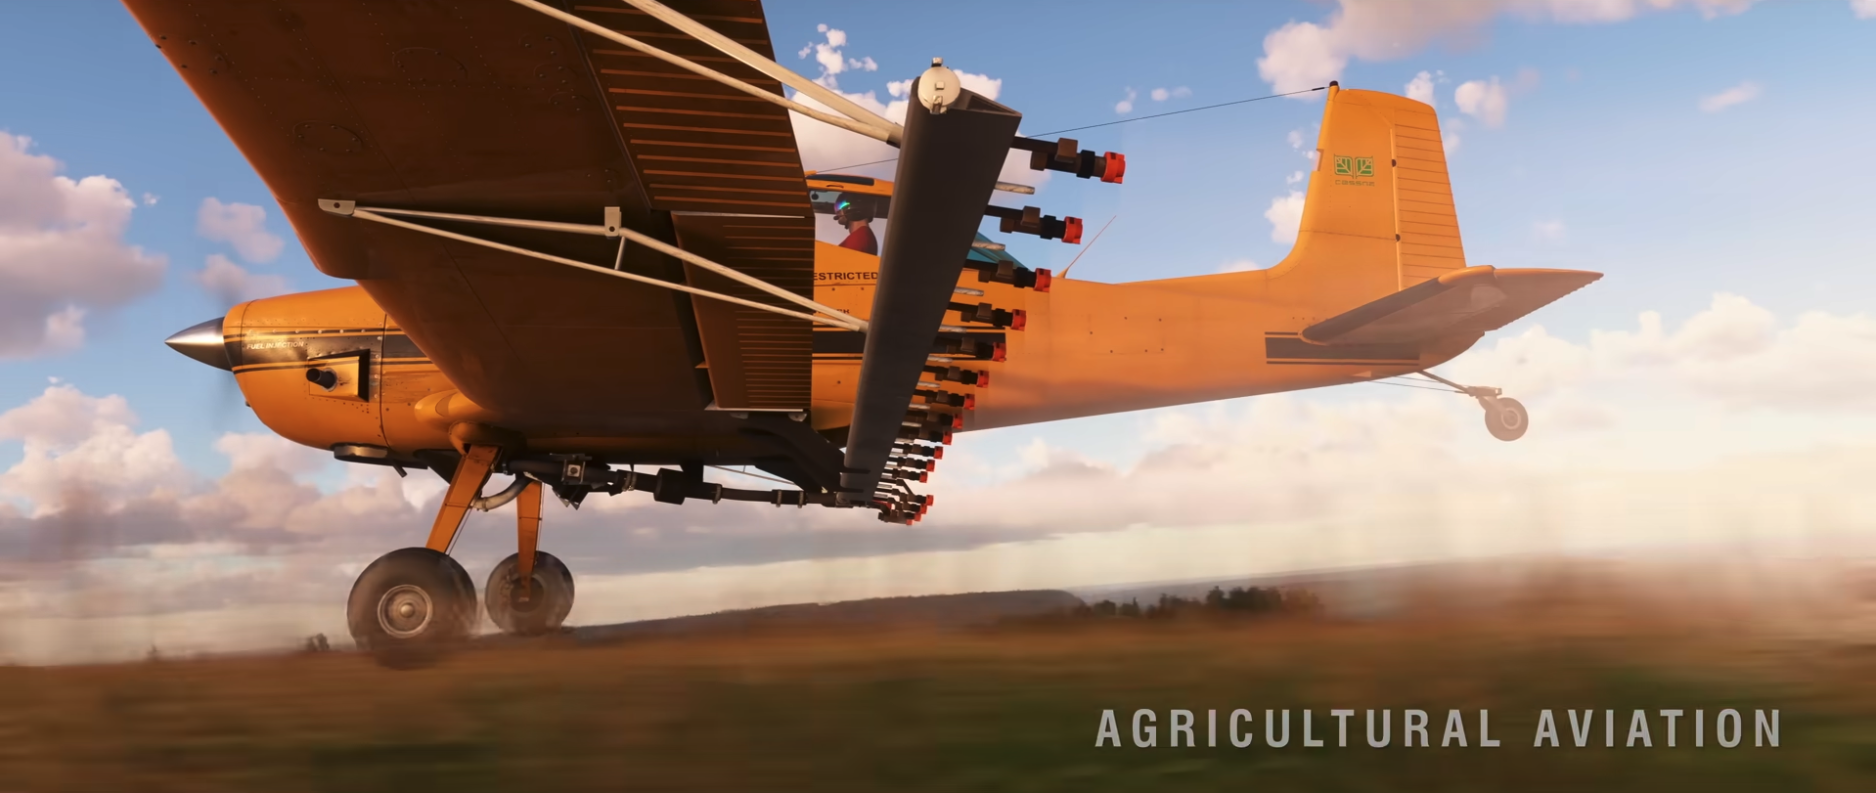 New Microsoft Flight Simulator Set to Feature Ag Aviation and